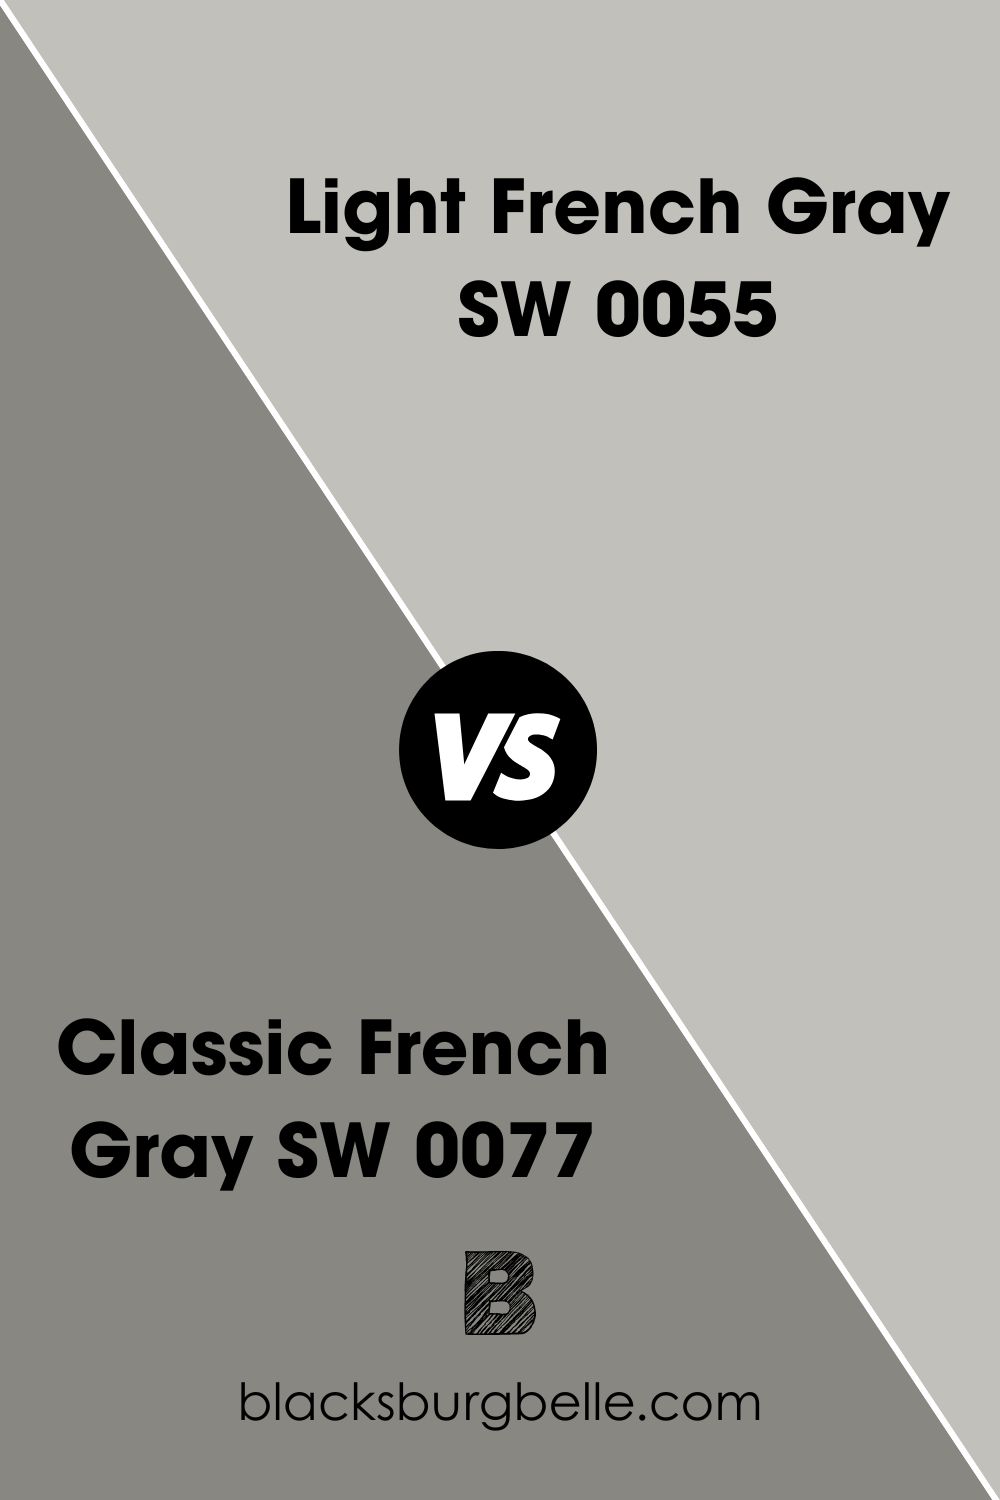 Classic French Gray SW 0077